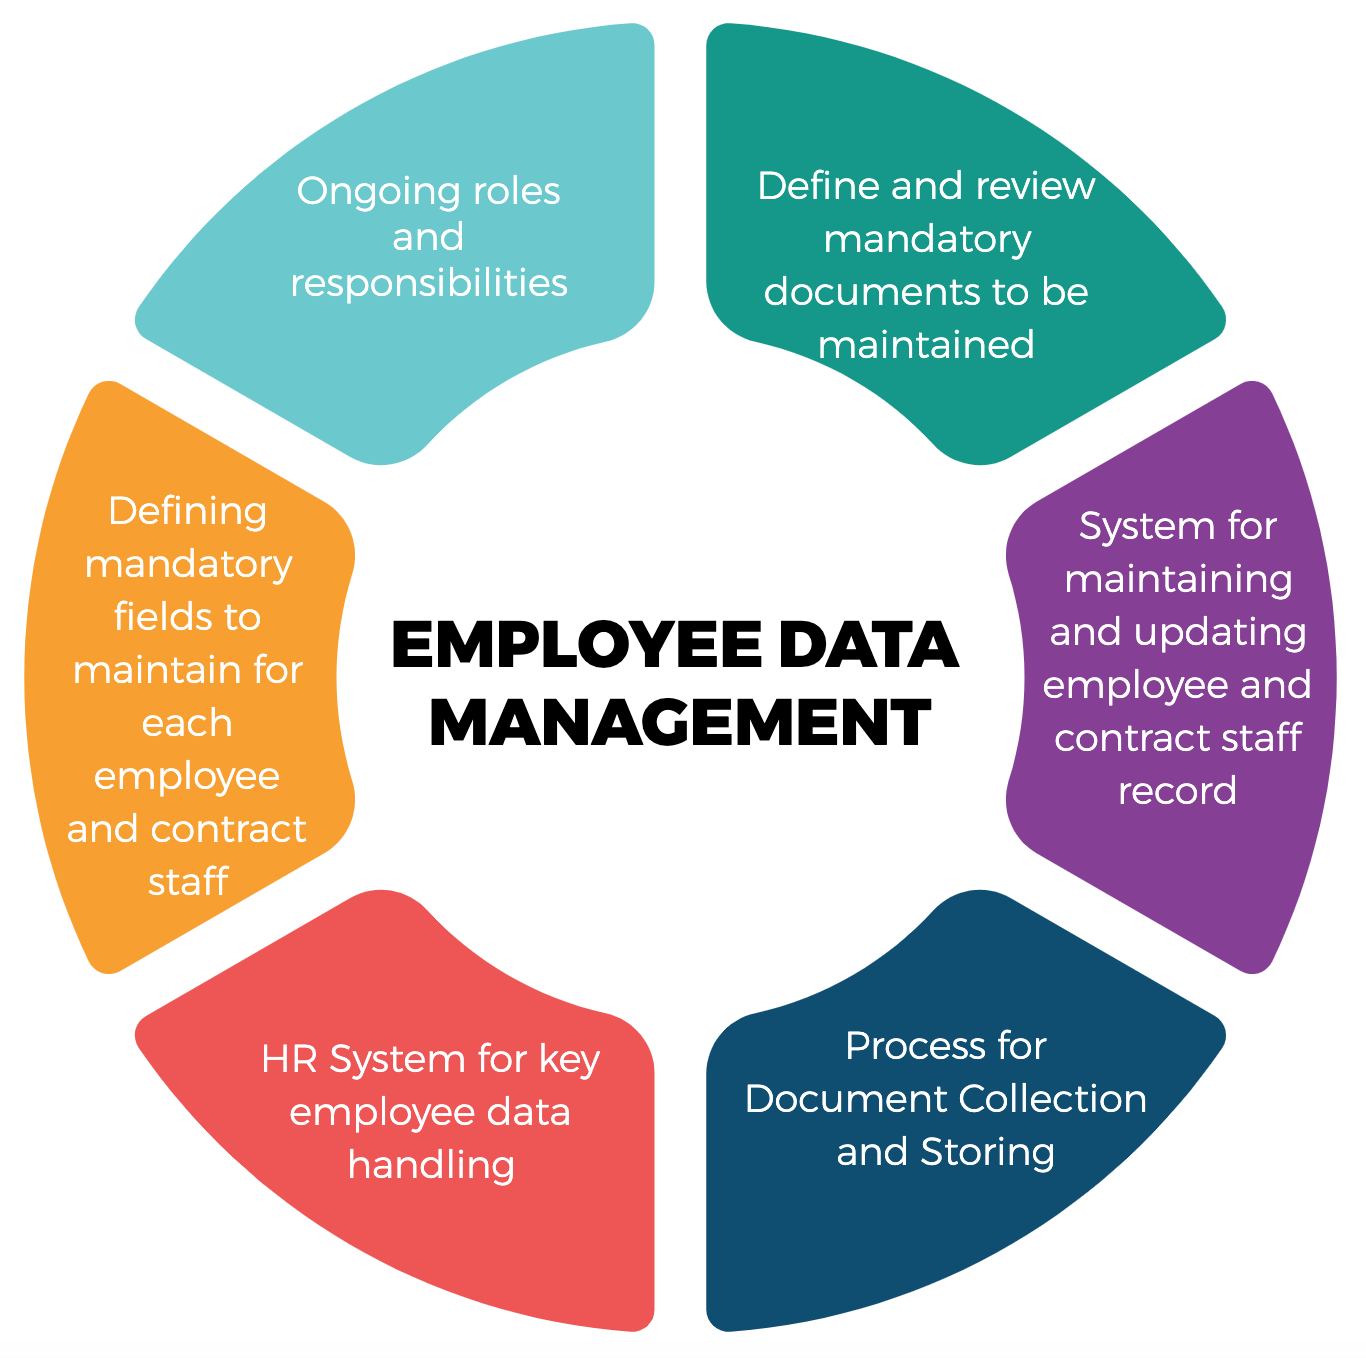 Employee Life Cycle: The Ultimate Guide for HR - AIHR